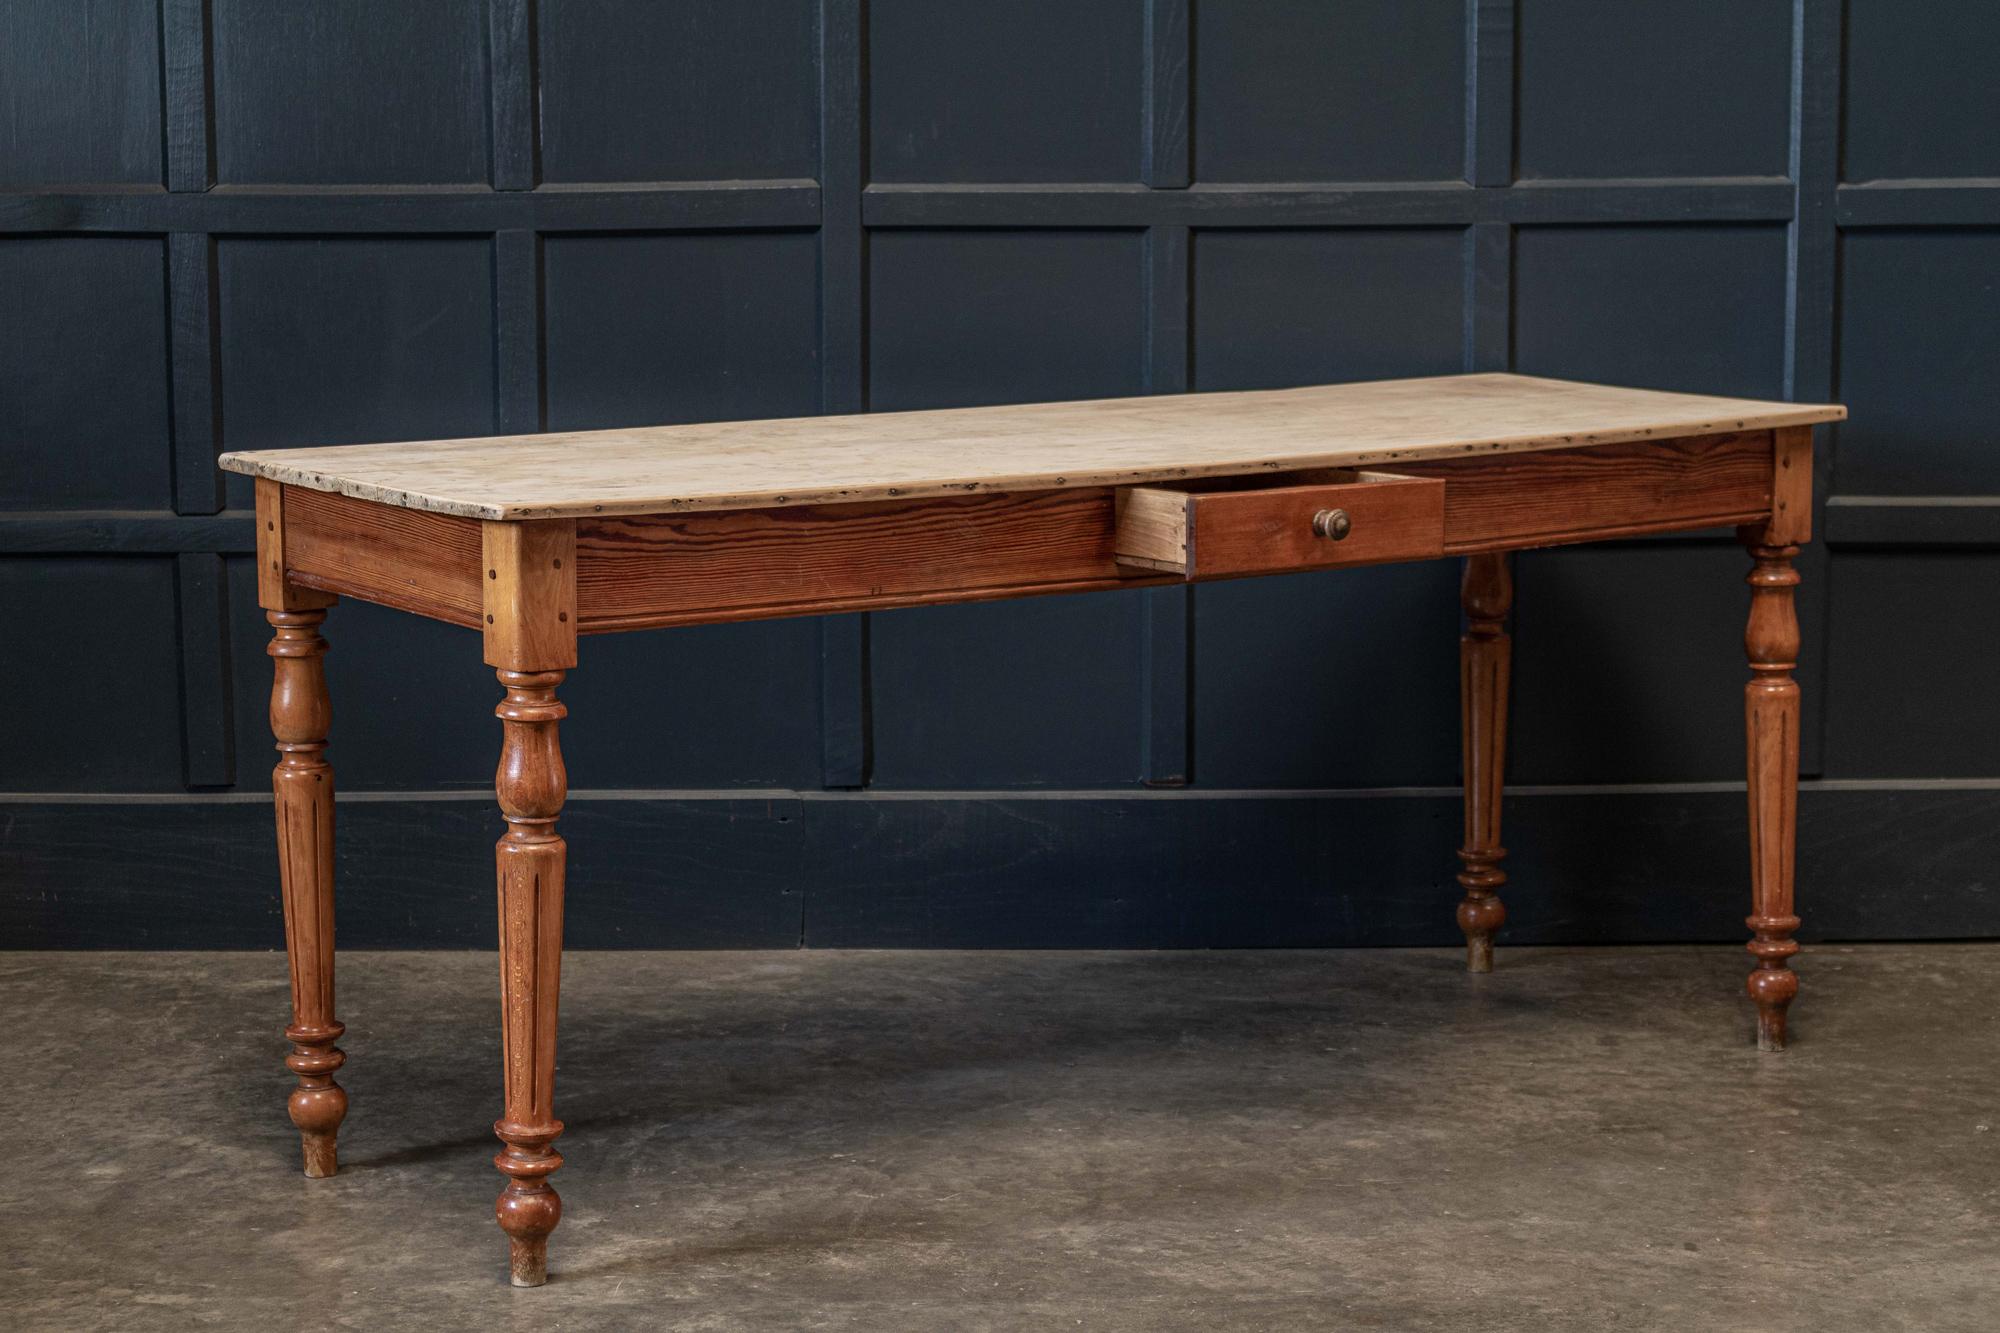 Circa 1870.

19thC French scrub top table, with fruitwood top, central drawer, elegant pegged fluted legs.

A versatile slim table, suitable as a server, console table, dining table or desk.

sku 751B

Measures: W 173 x D 59 x H 74.5cm.